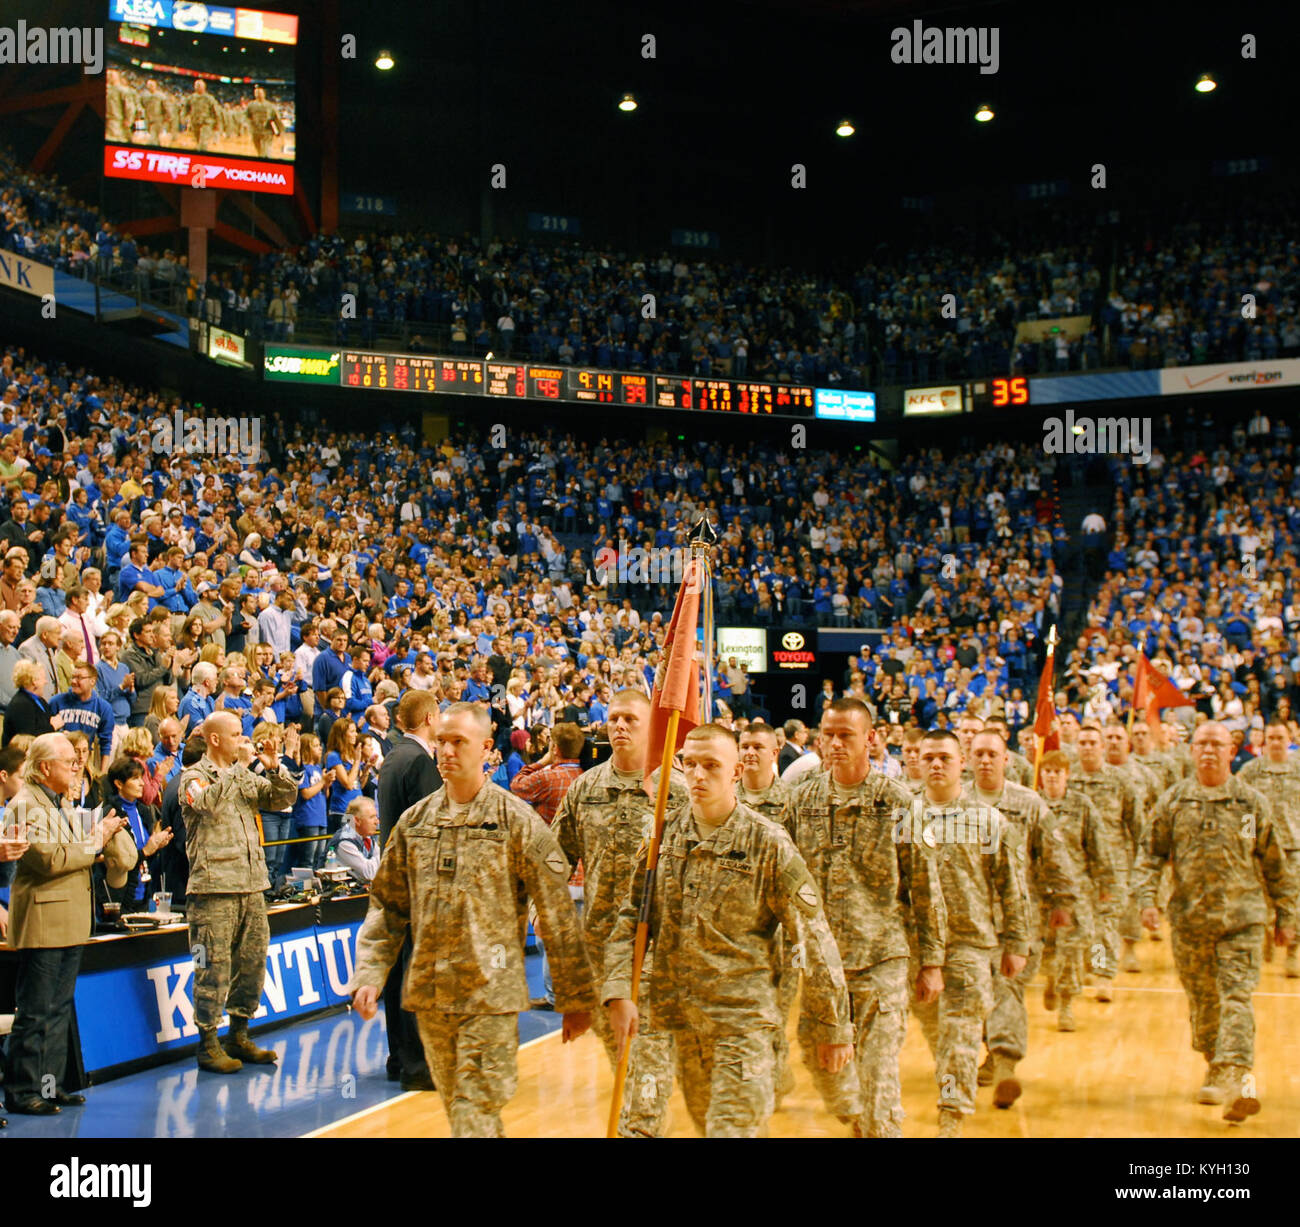 The 201st Engineer Battalion was honored on the floor of Rupp Arena during the UK vs. Loyola Game Dec. 22, when Gov. Steve Beshear and Adjutant General, Maj. Gen. Edward W. Tonini presented the Valorous Unit Award in honor of the unit's actions in Afghanistan in 2008. (photo by Capt. Stephen Martin, Kentucky National Guard Public Affairs) Stock Photo